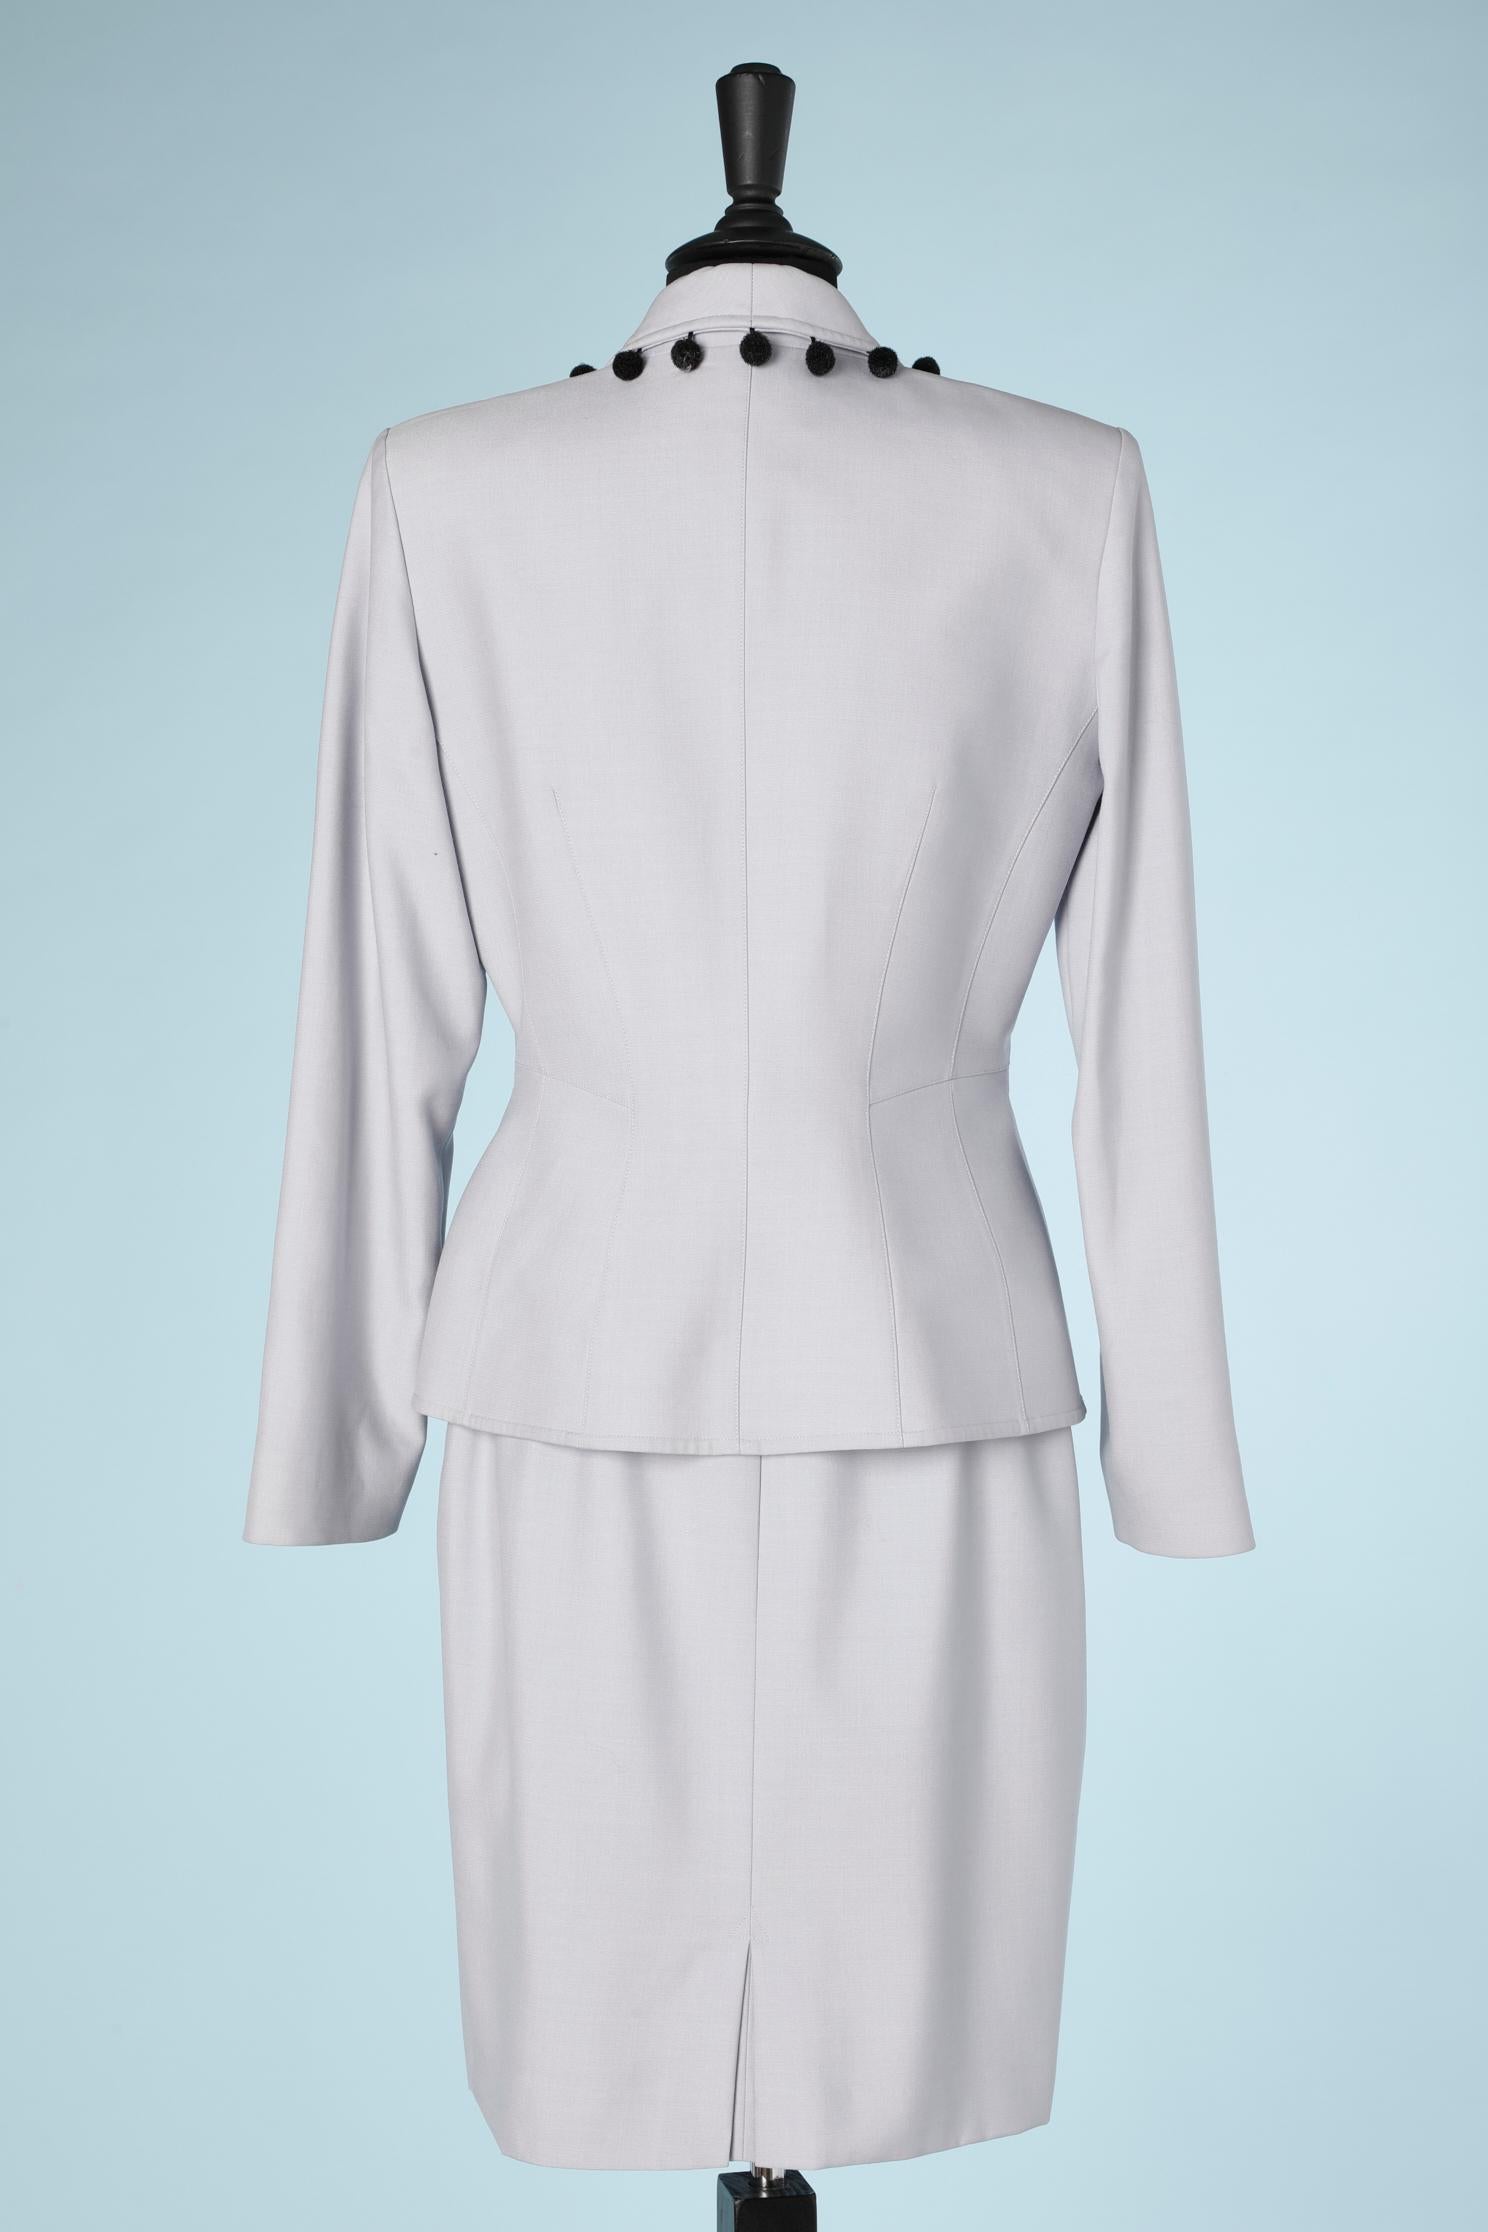 Wool sky blue skirt suit with black passementerie on the collar Mugler 1980   For Sale 1